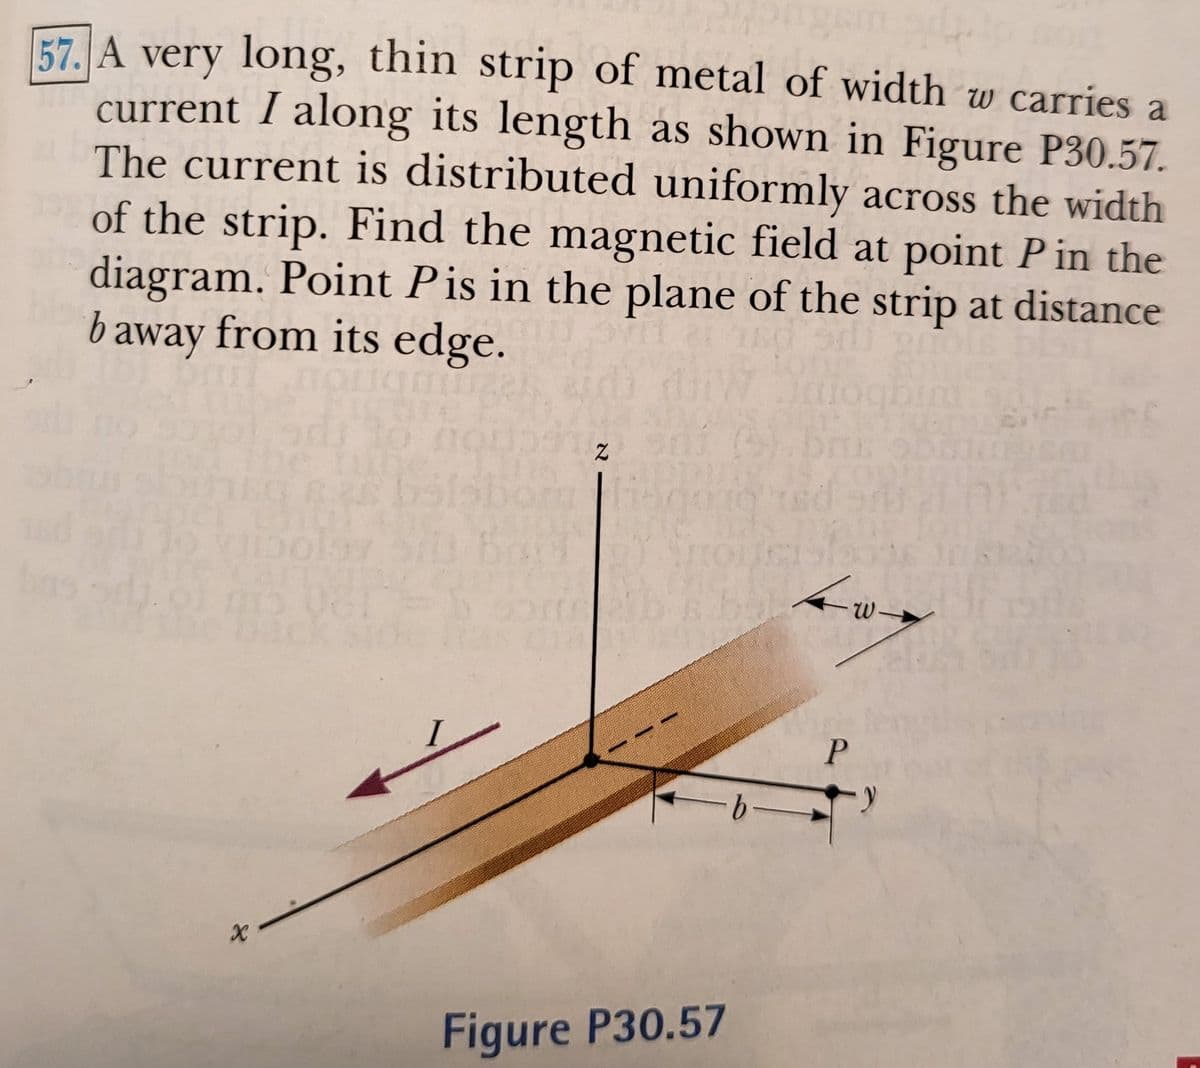 57. A very long, thin strip of metal of width w carries a
current I along its length as shown in Figure P30.57.
The current is distributed uniformly across the width
of the strip. Find the magnetic field at point P in the
diagram. Point Pis in the plane of the strip at distance
baway from its edge.
Hoghin
W
P
Figure P30.57
